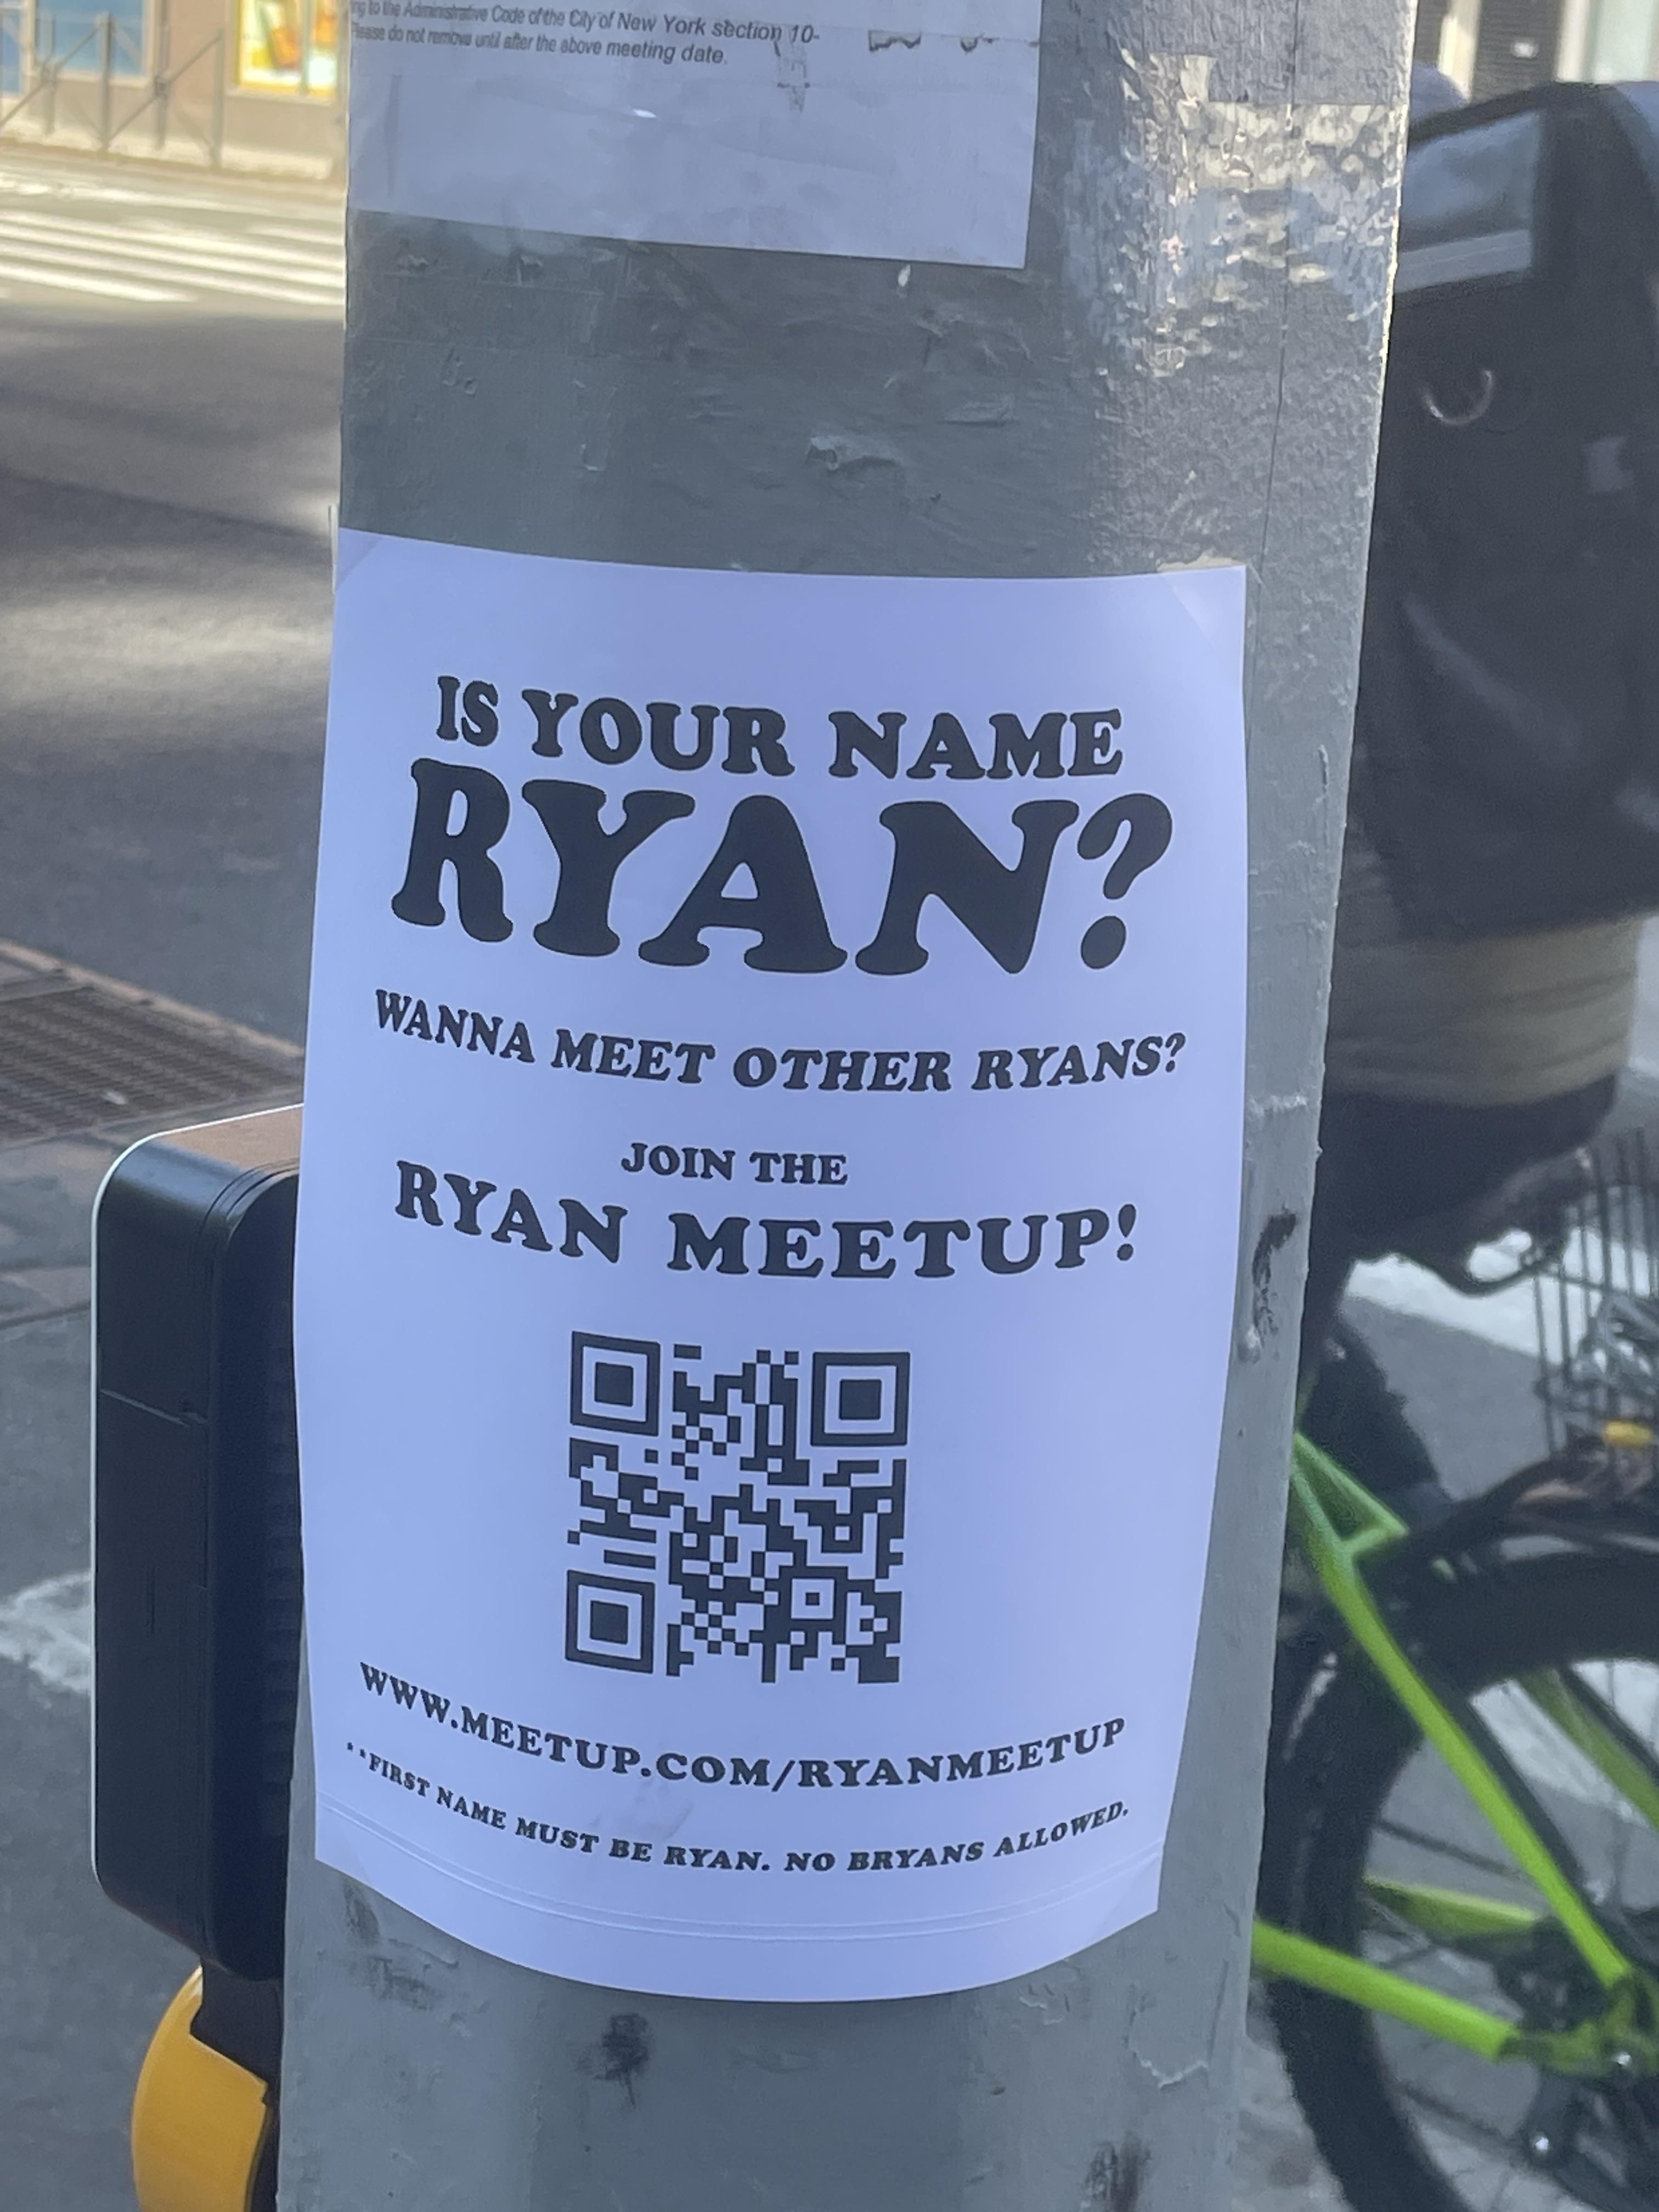 I spotted this flyer on 9th Ave in NYC and I haven’t been able to stop thinking about it since